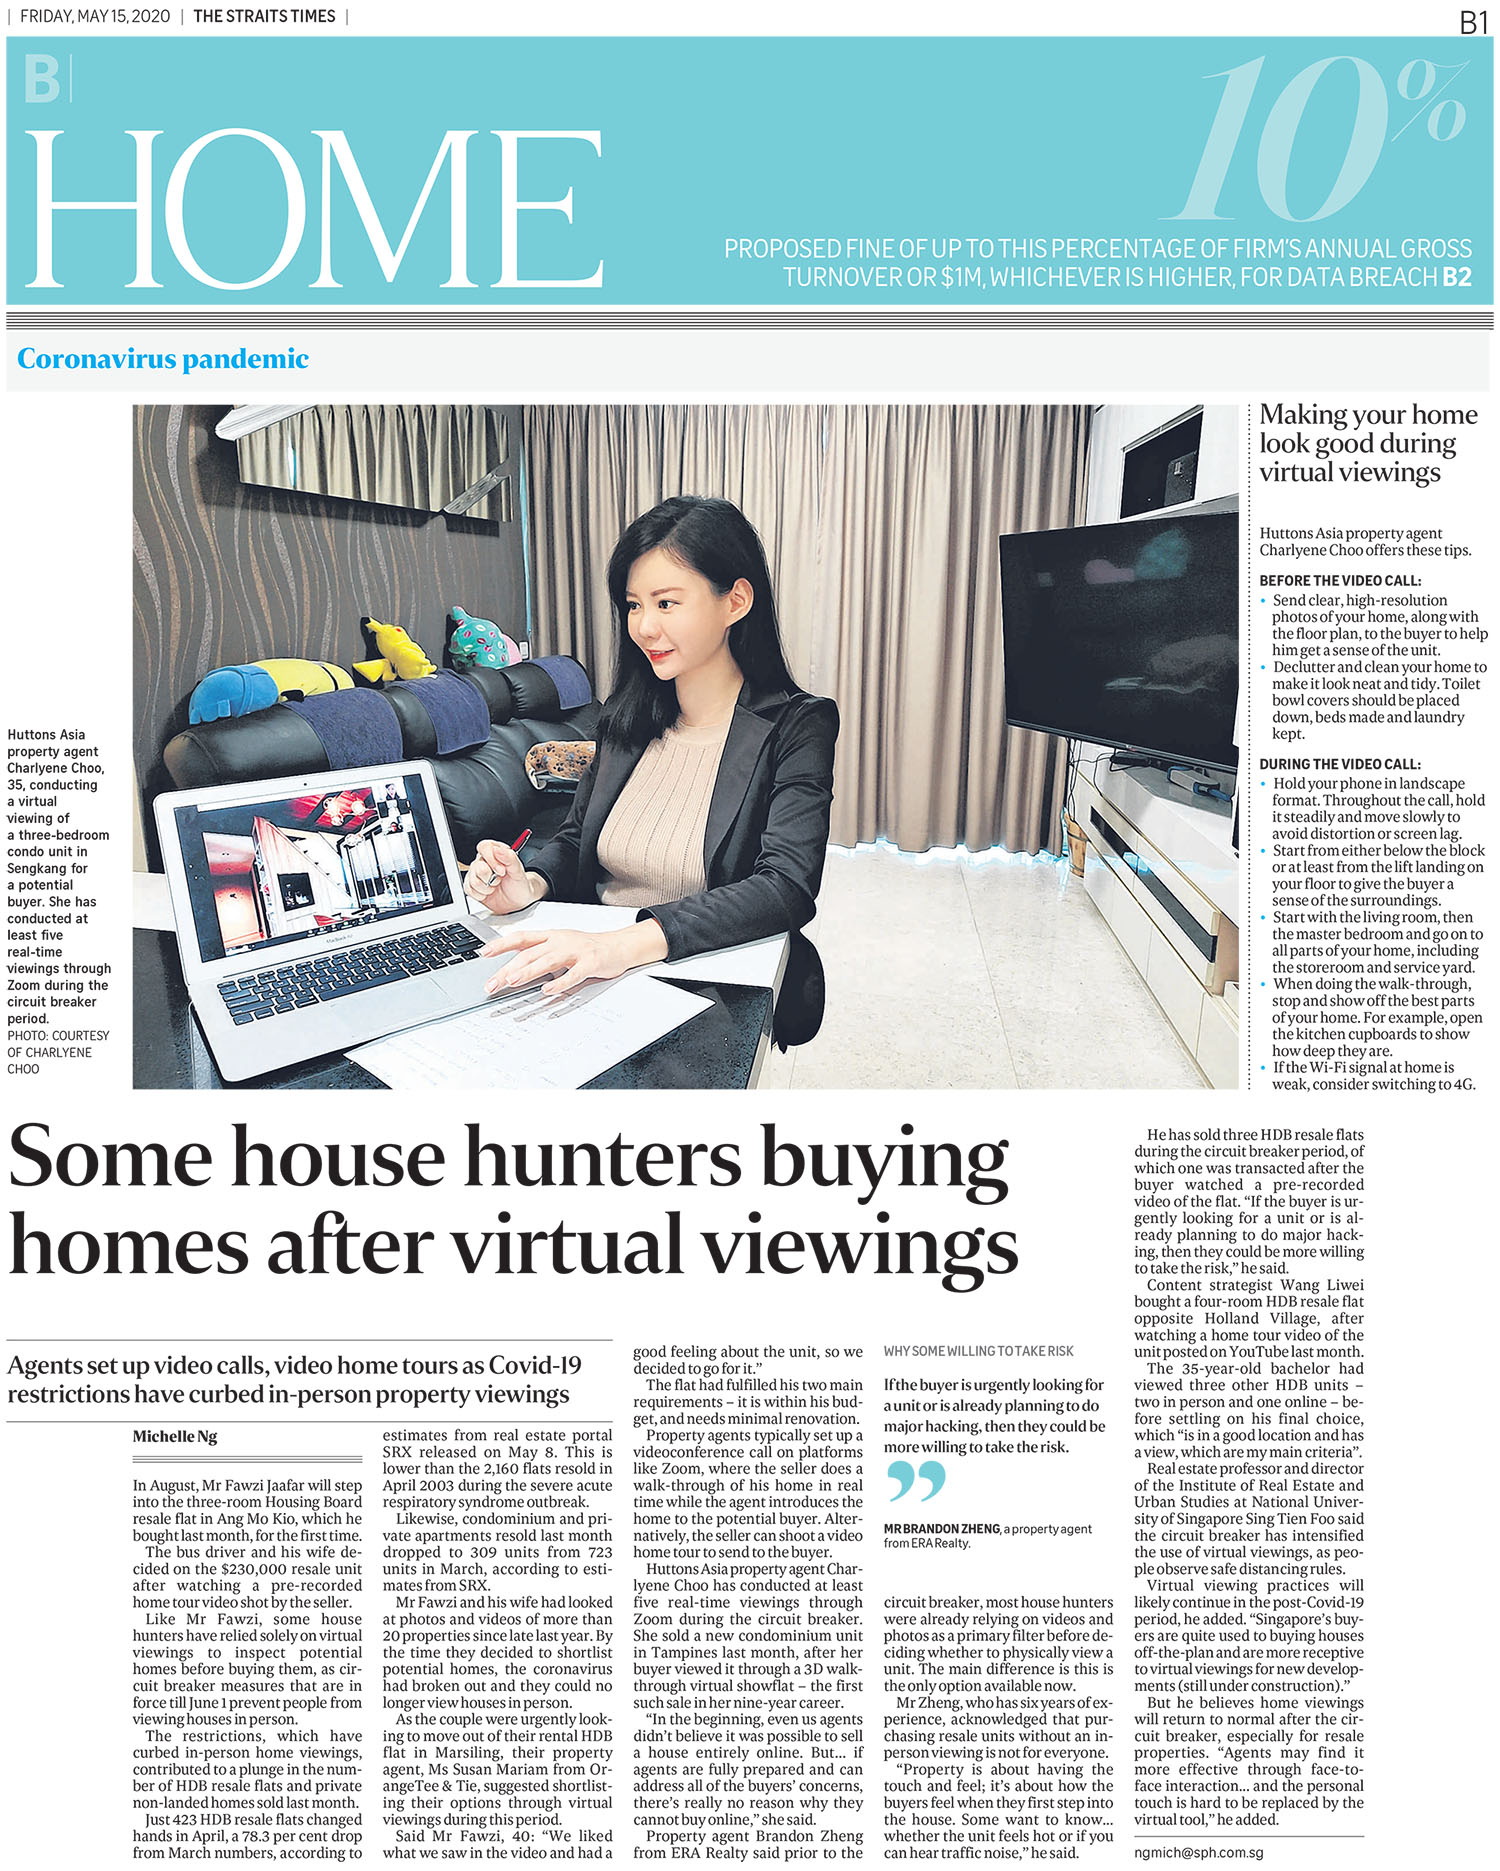 some-house-hunters-buying-homes-after-virtual-viewings